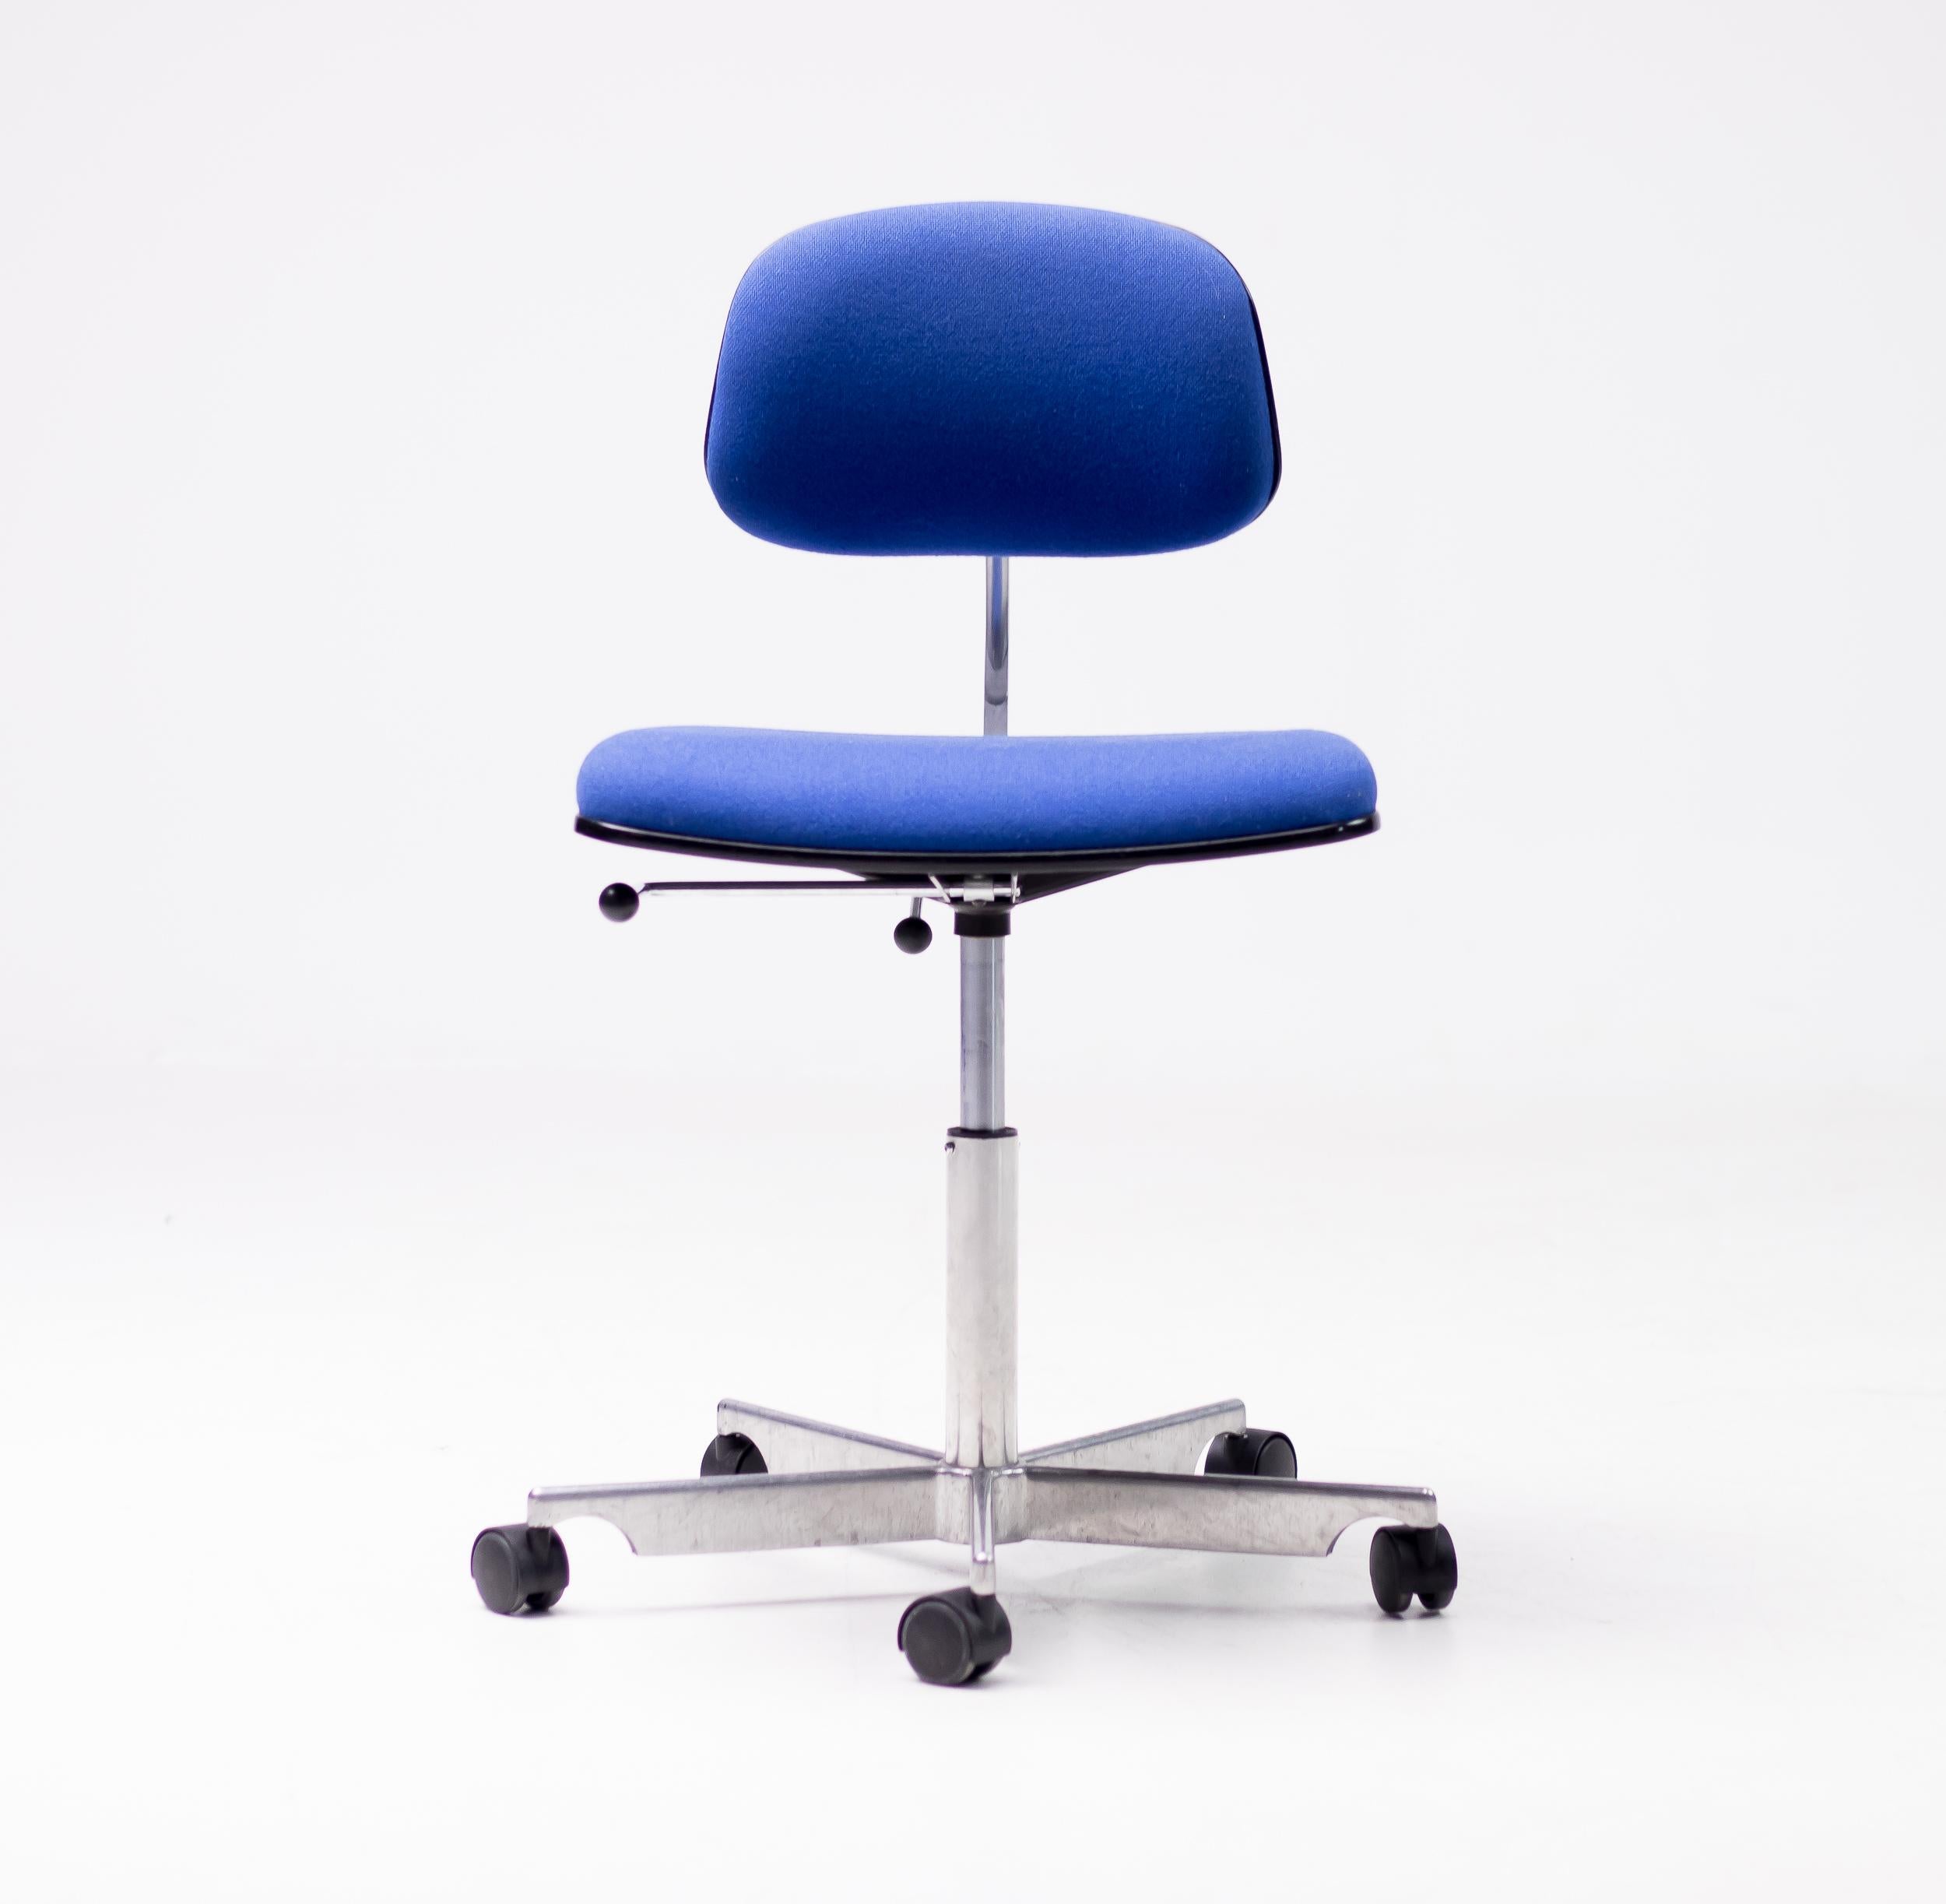 A design icon, the Kevi task chair offers adjustable height, adjustable angle back and adjustable seat height. Surprisingly comfortable, the Kevi chair is a favorite among architects and designers for its sturdy design, clear articulation and long